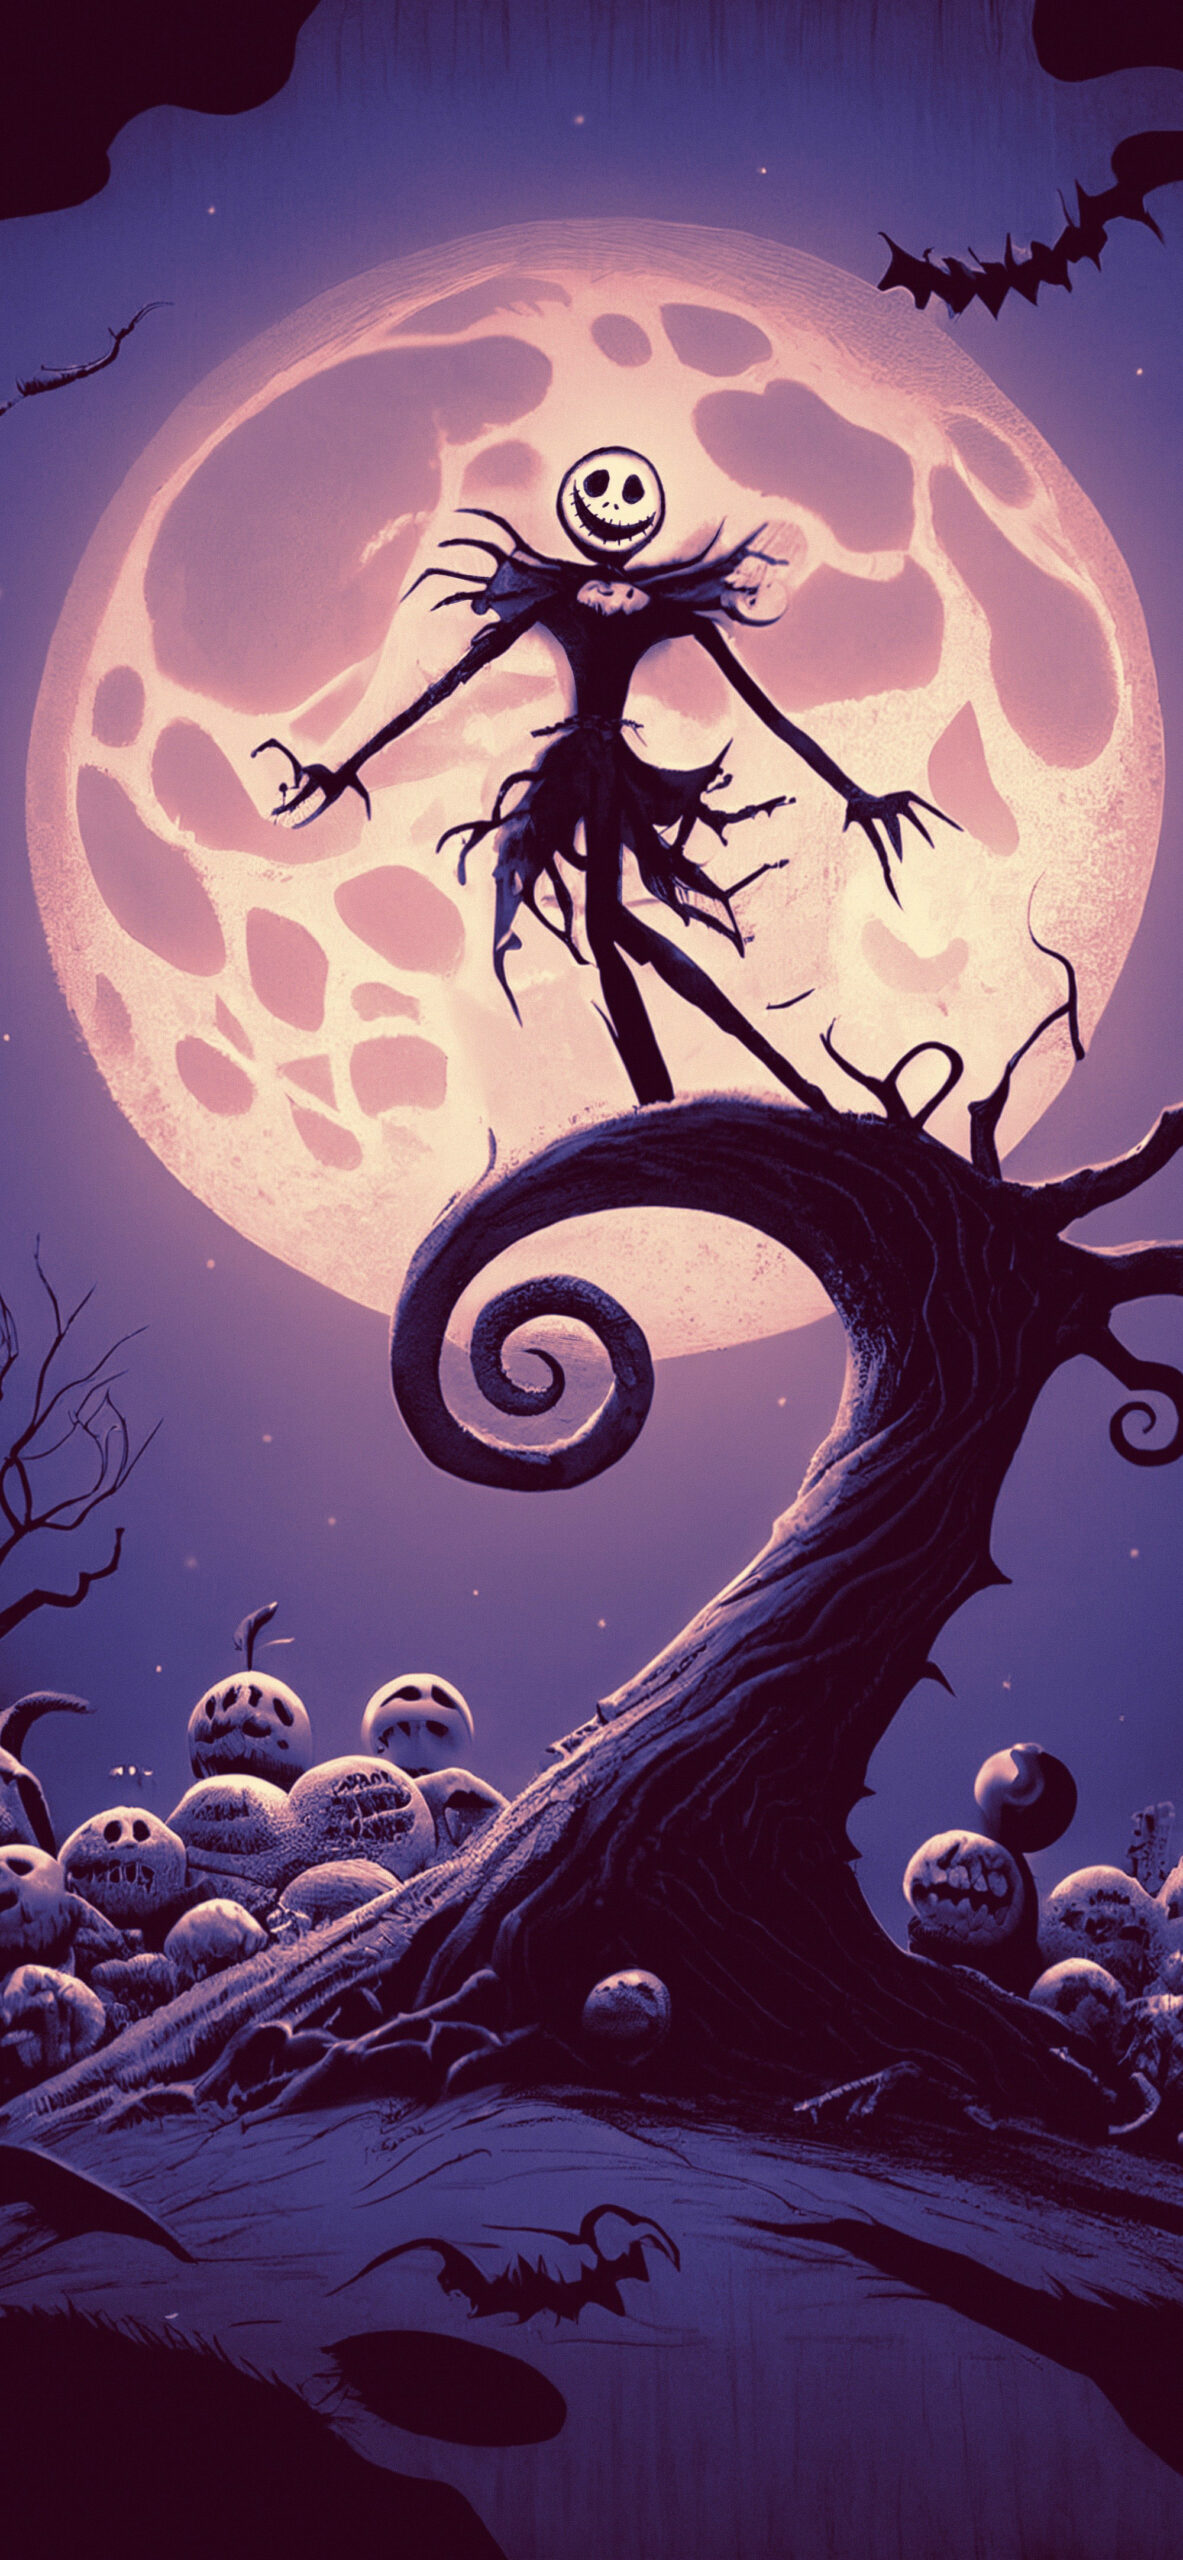 the nightmare before christmas aesthetic wallpaper 2